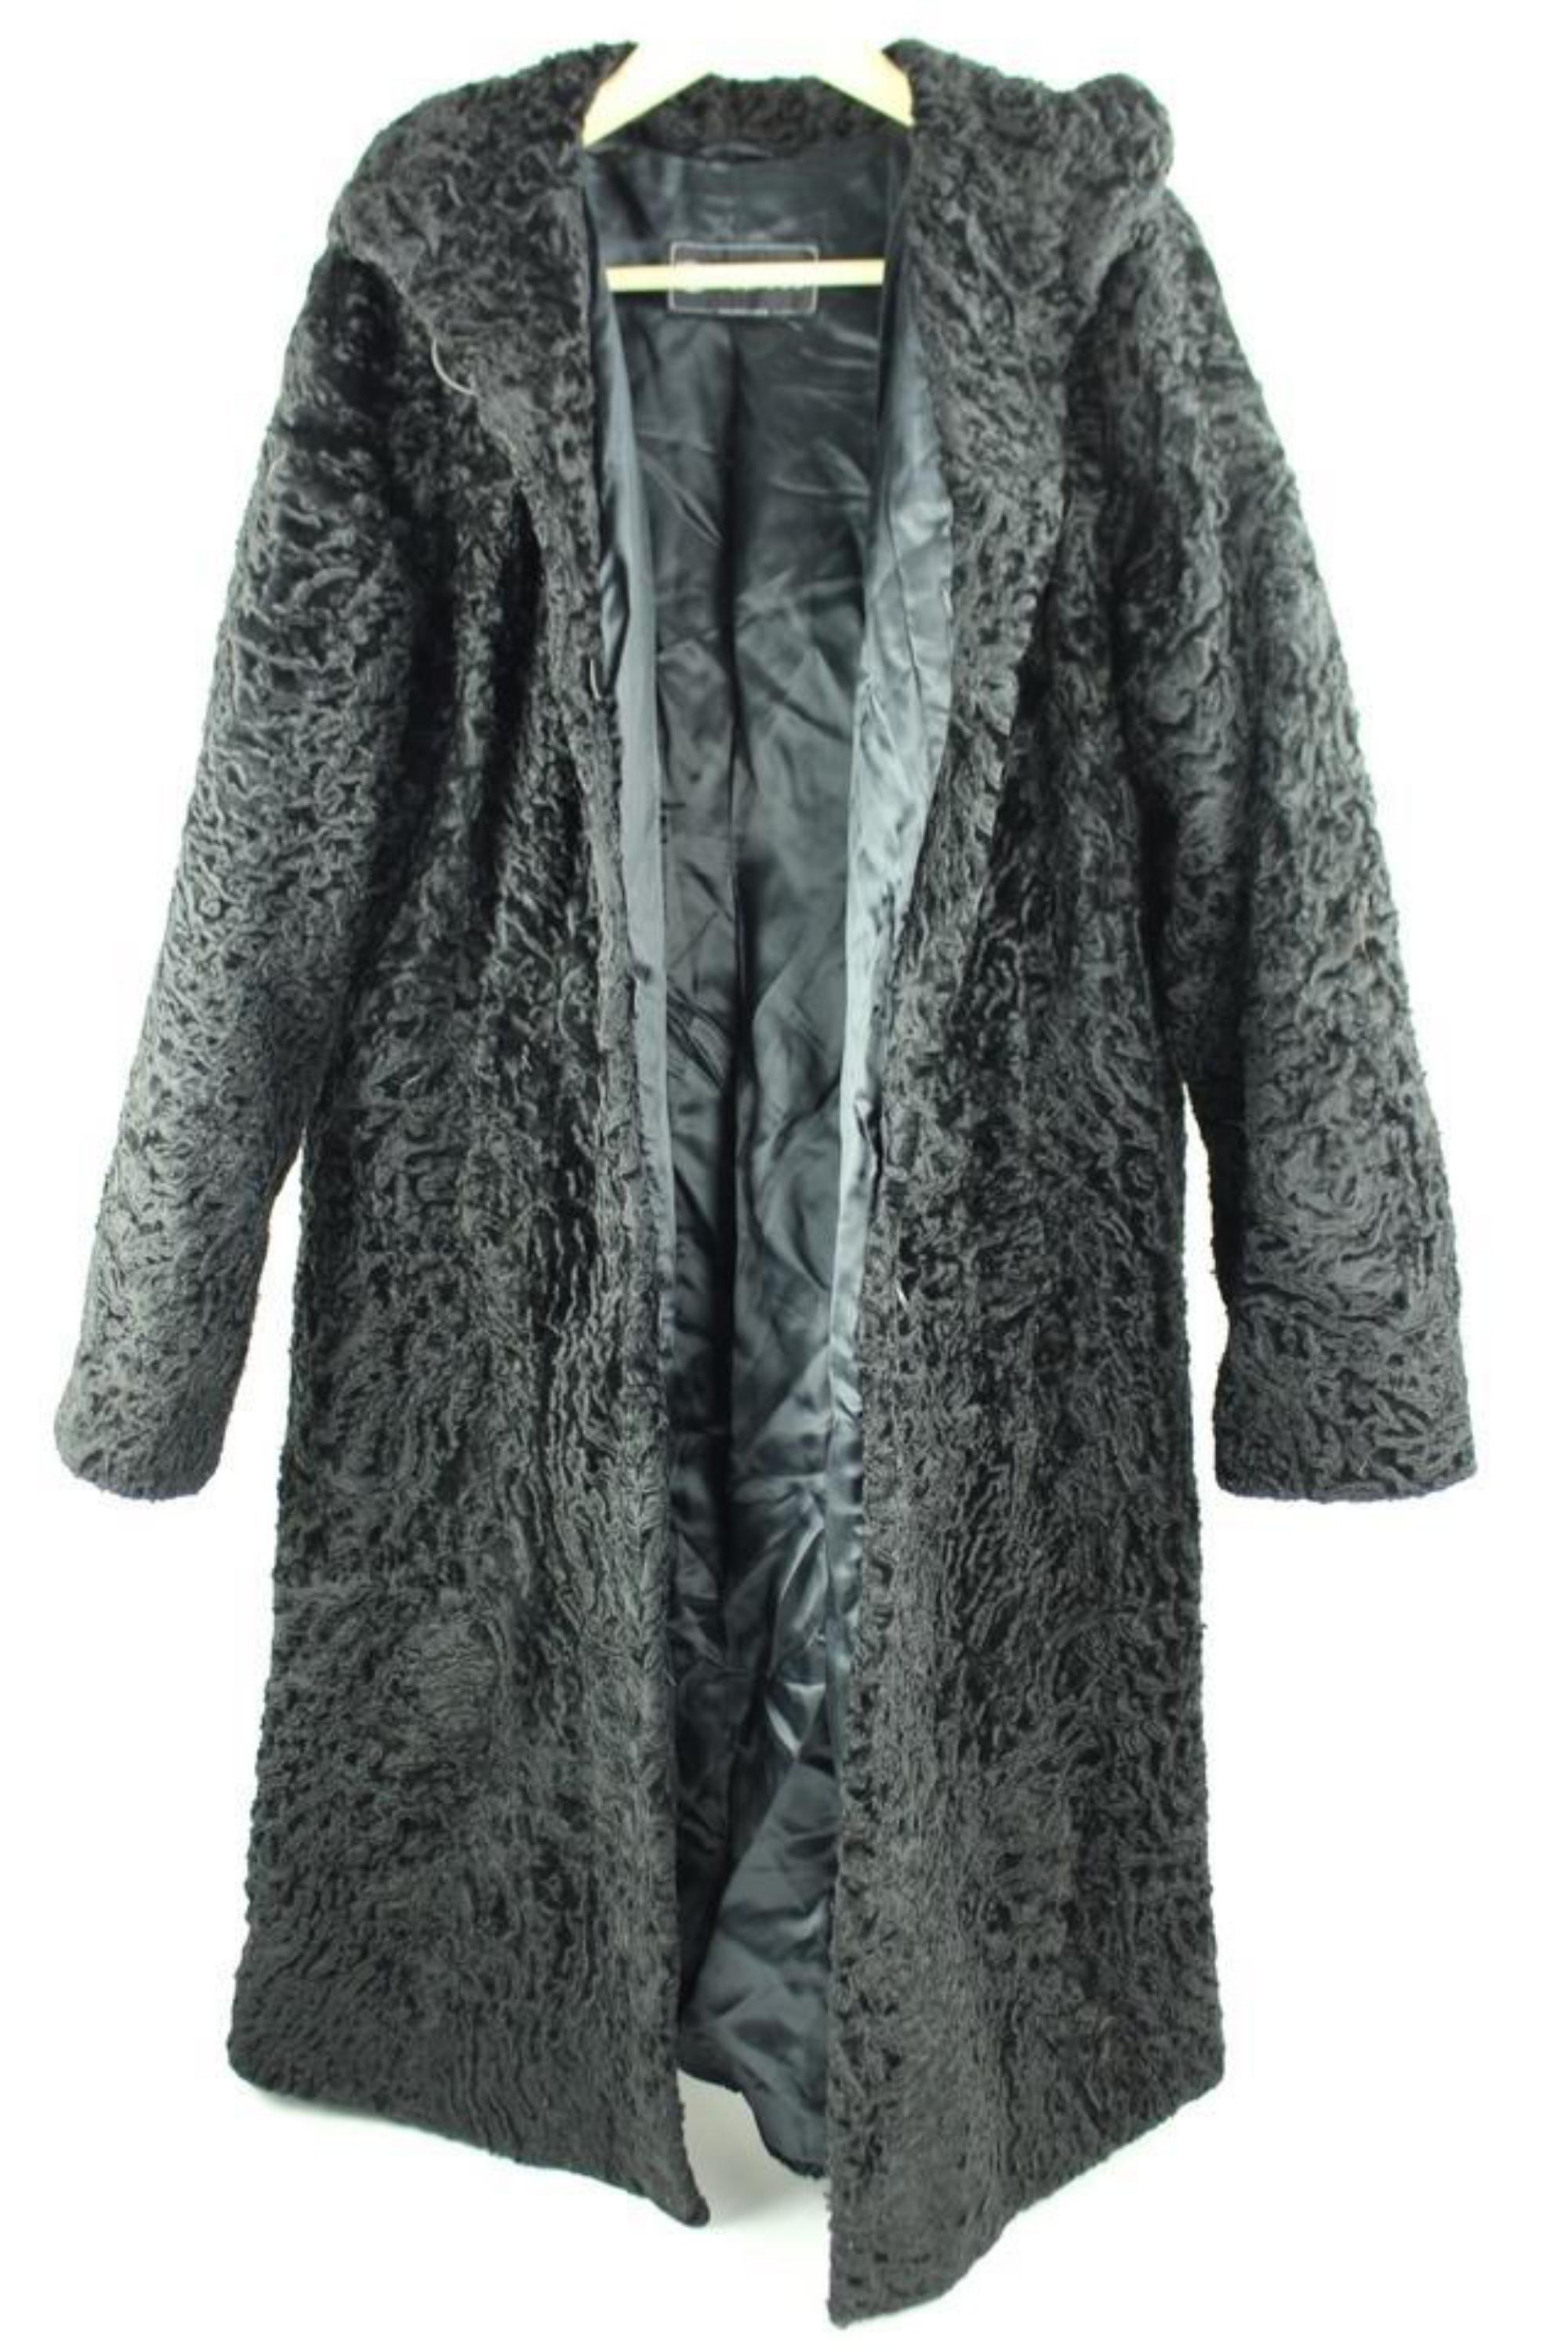 Fur-Top Astrakhan Coat
This item will ship immediately!!
Previously owned.
Size: 8 M
Length: 42